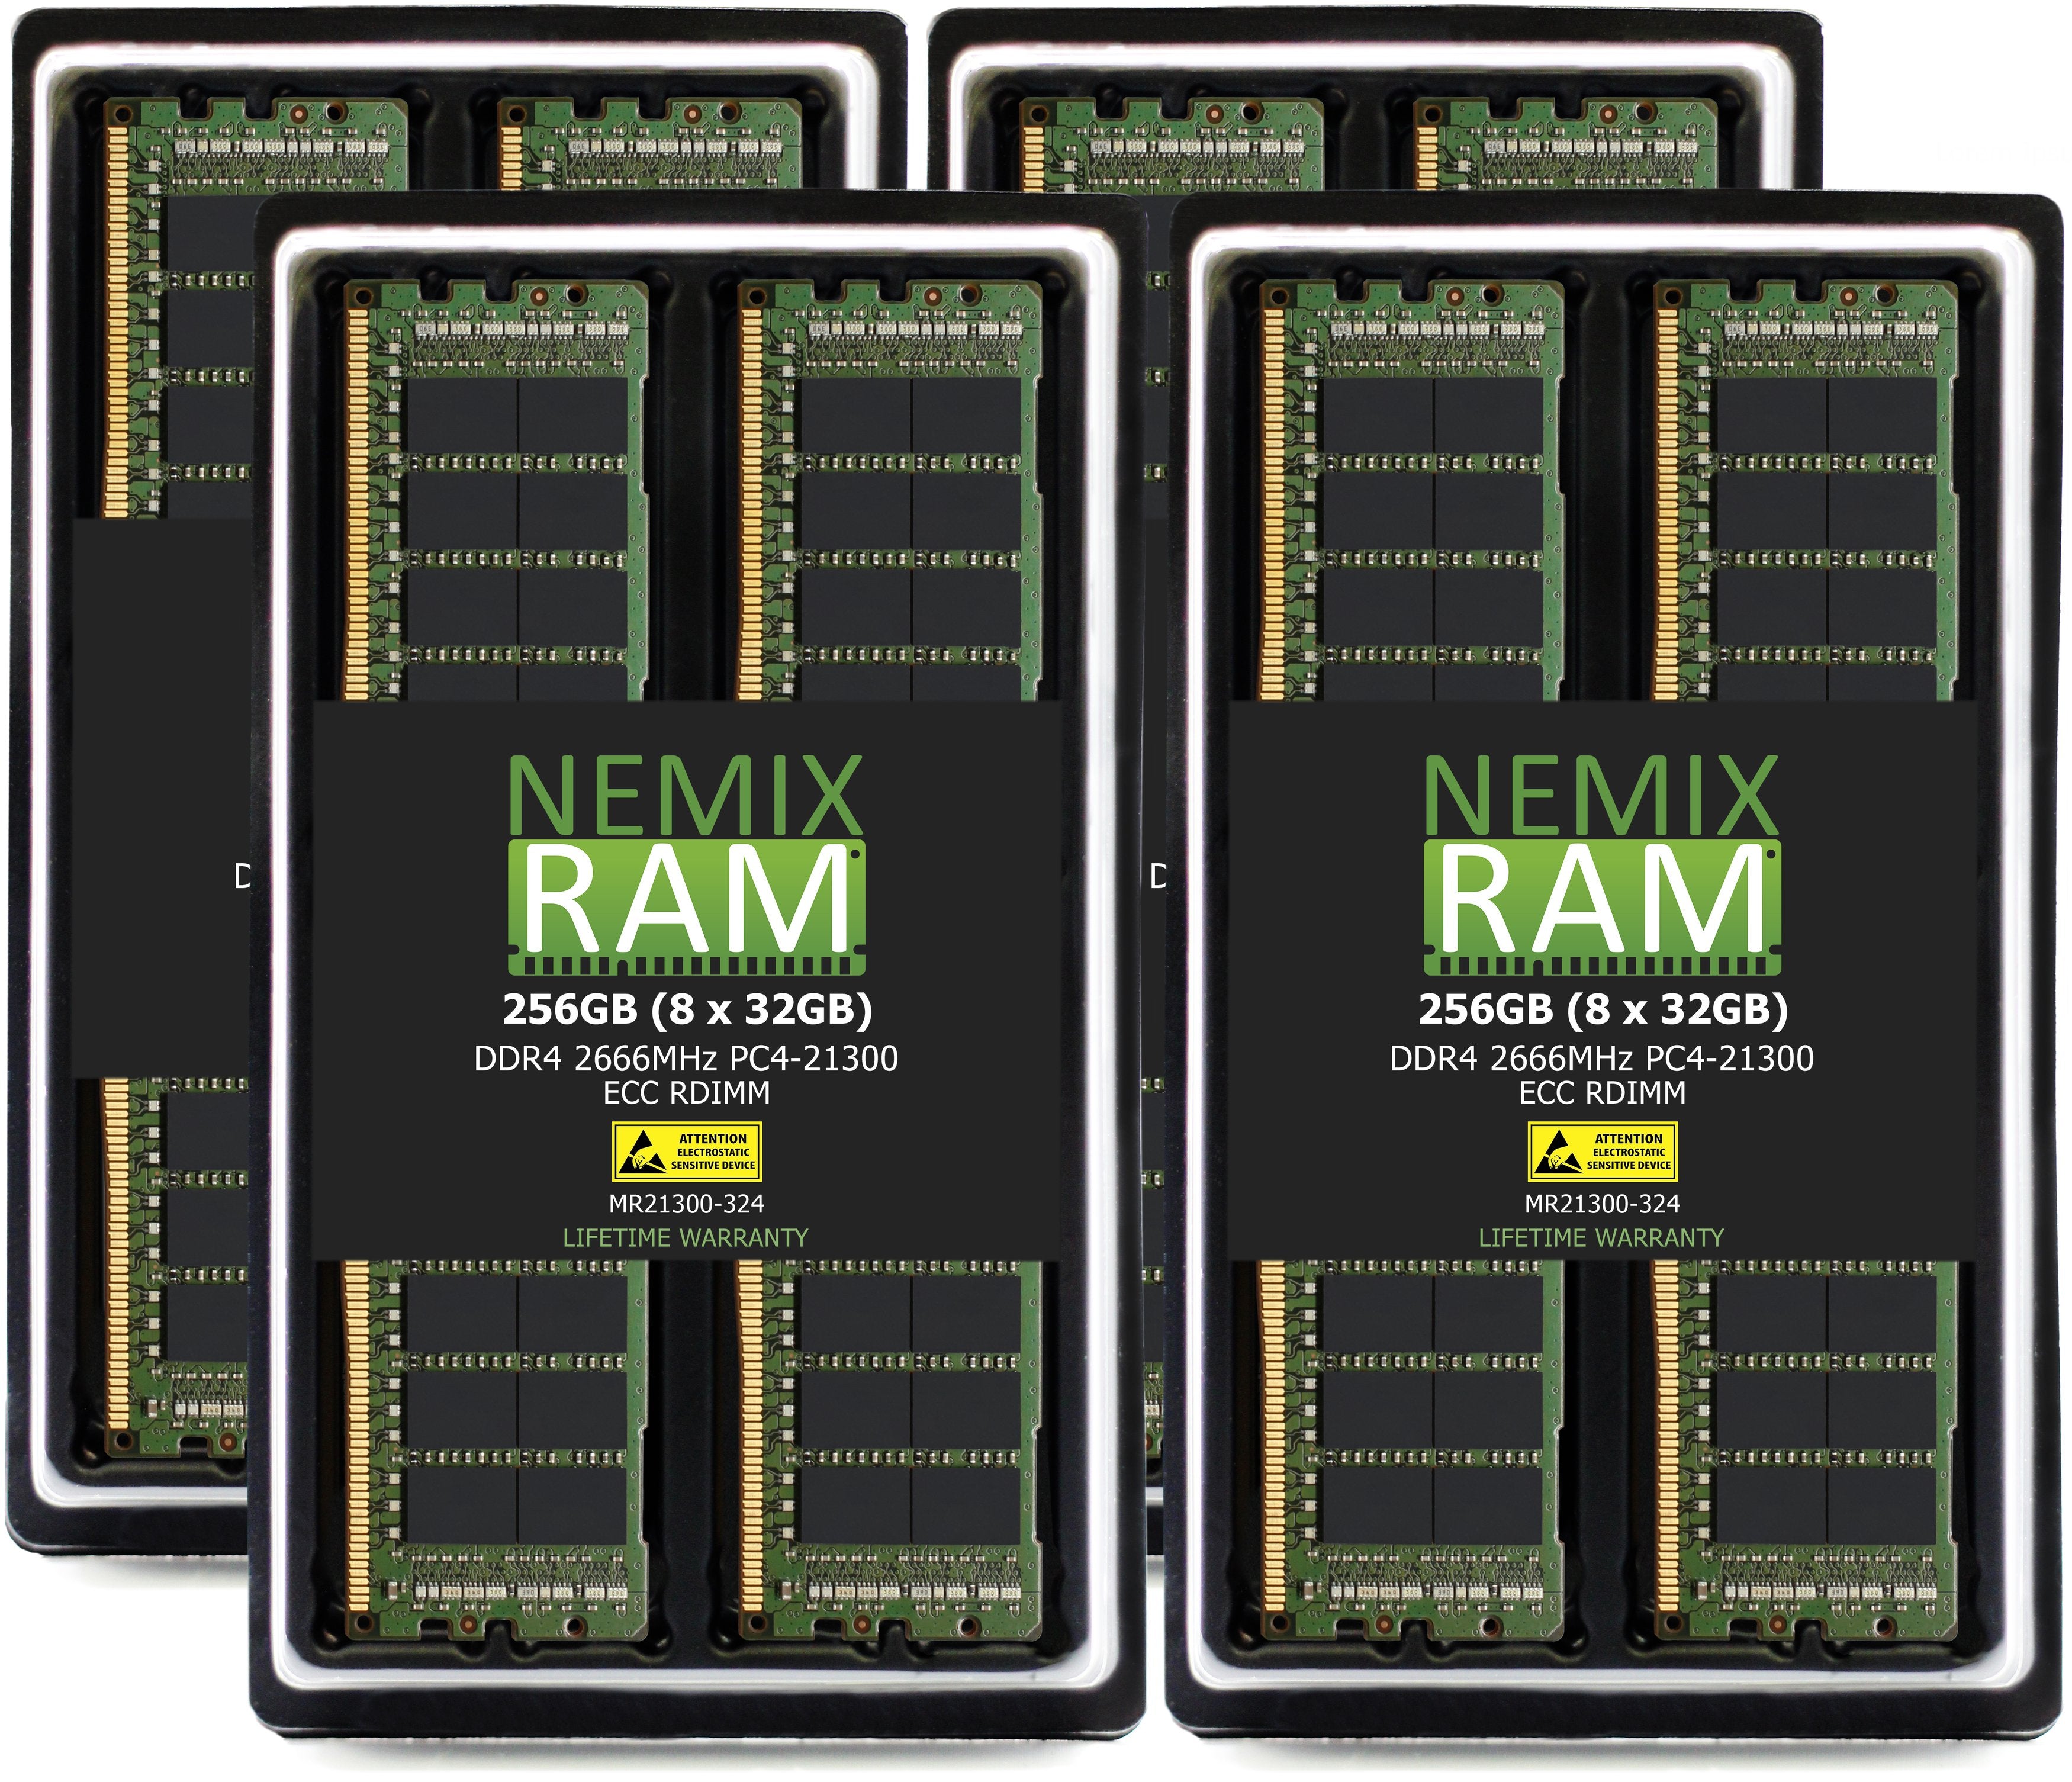 DDR4 2666MHZ PC4-21300 RDIMM Compatible with Synology FlashStation FS6400